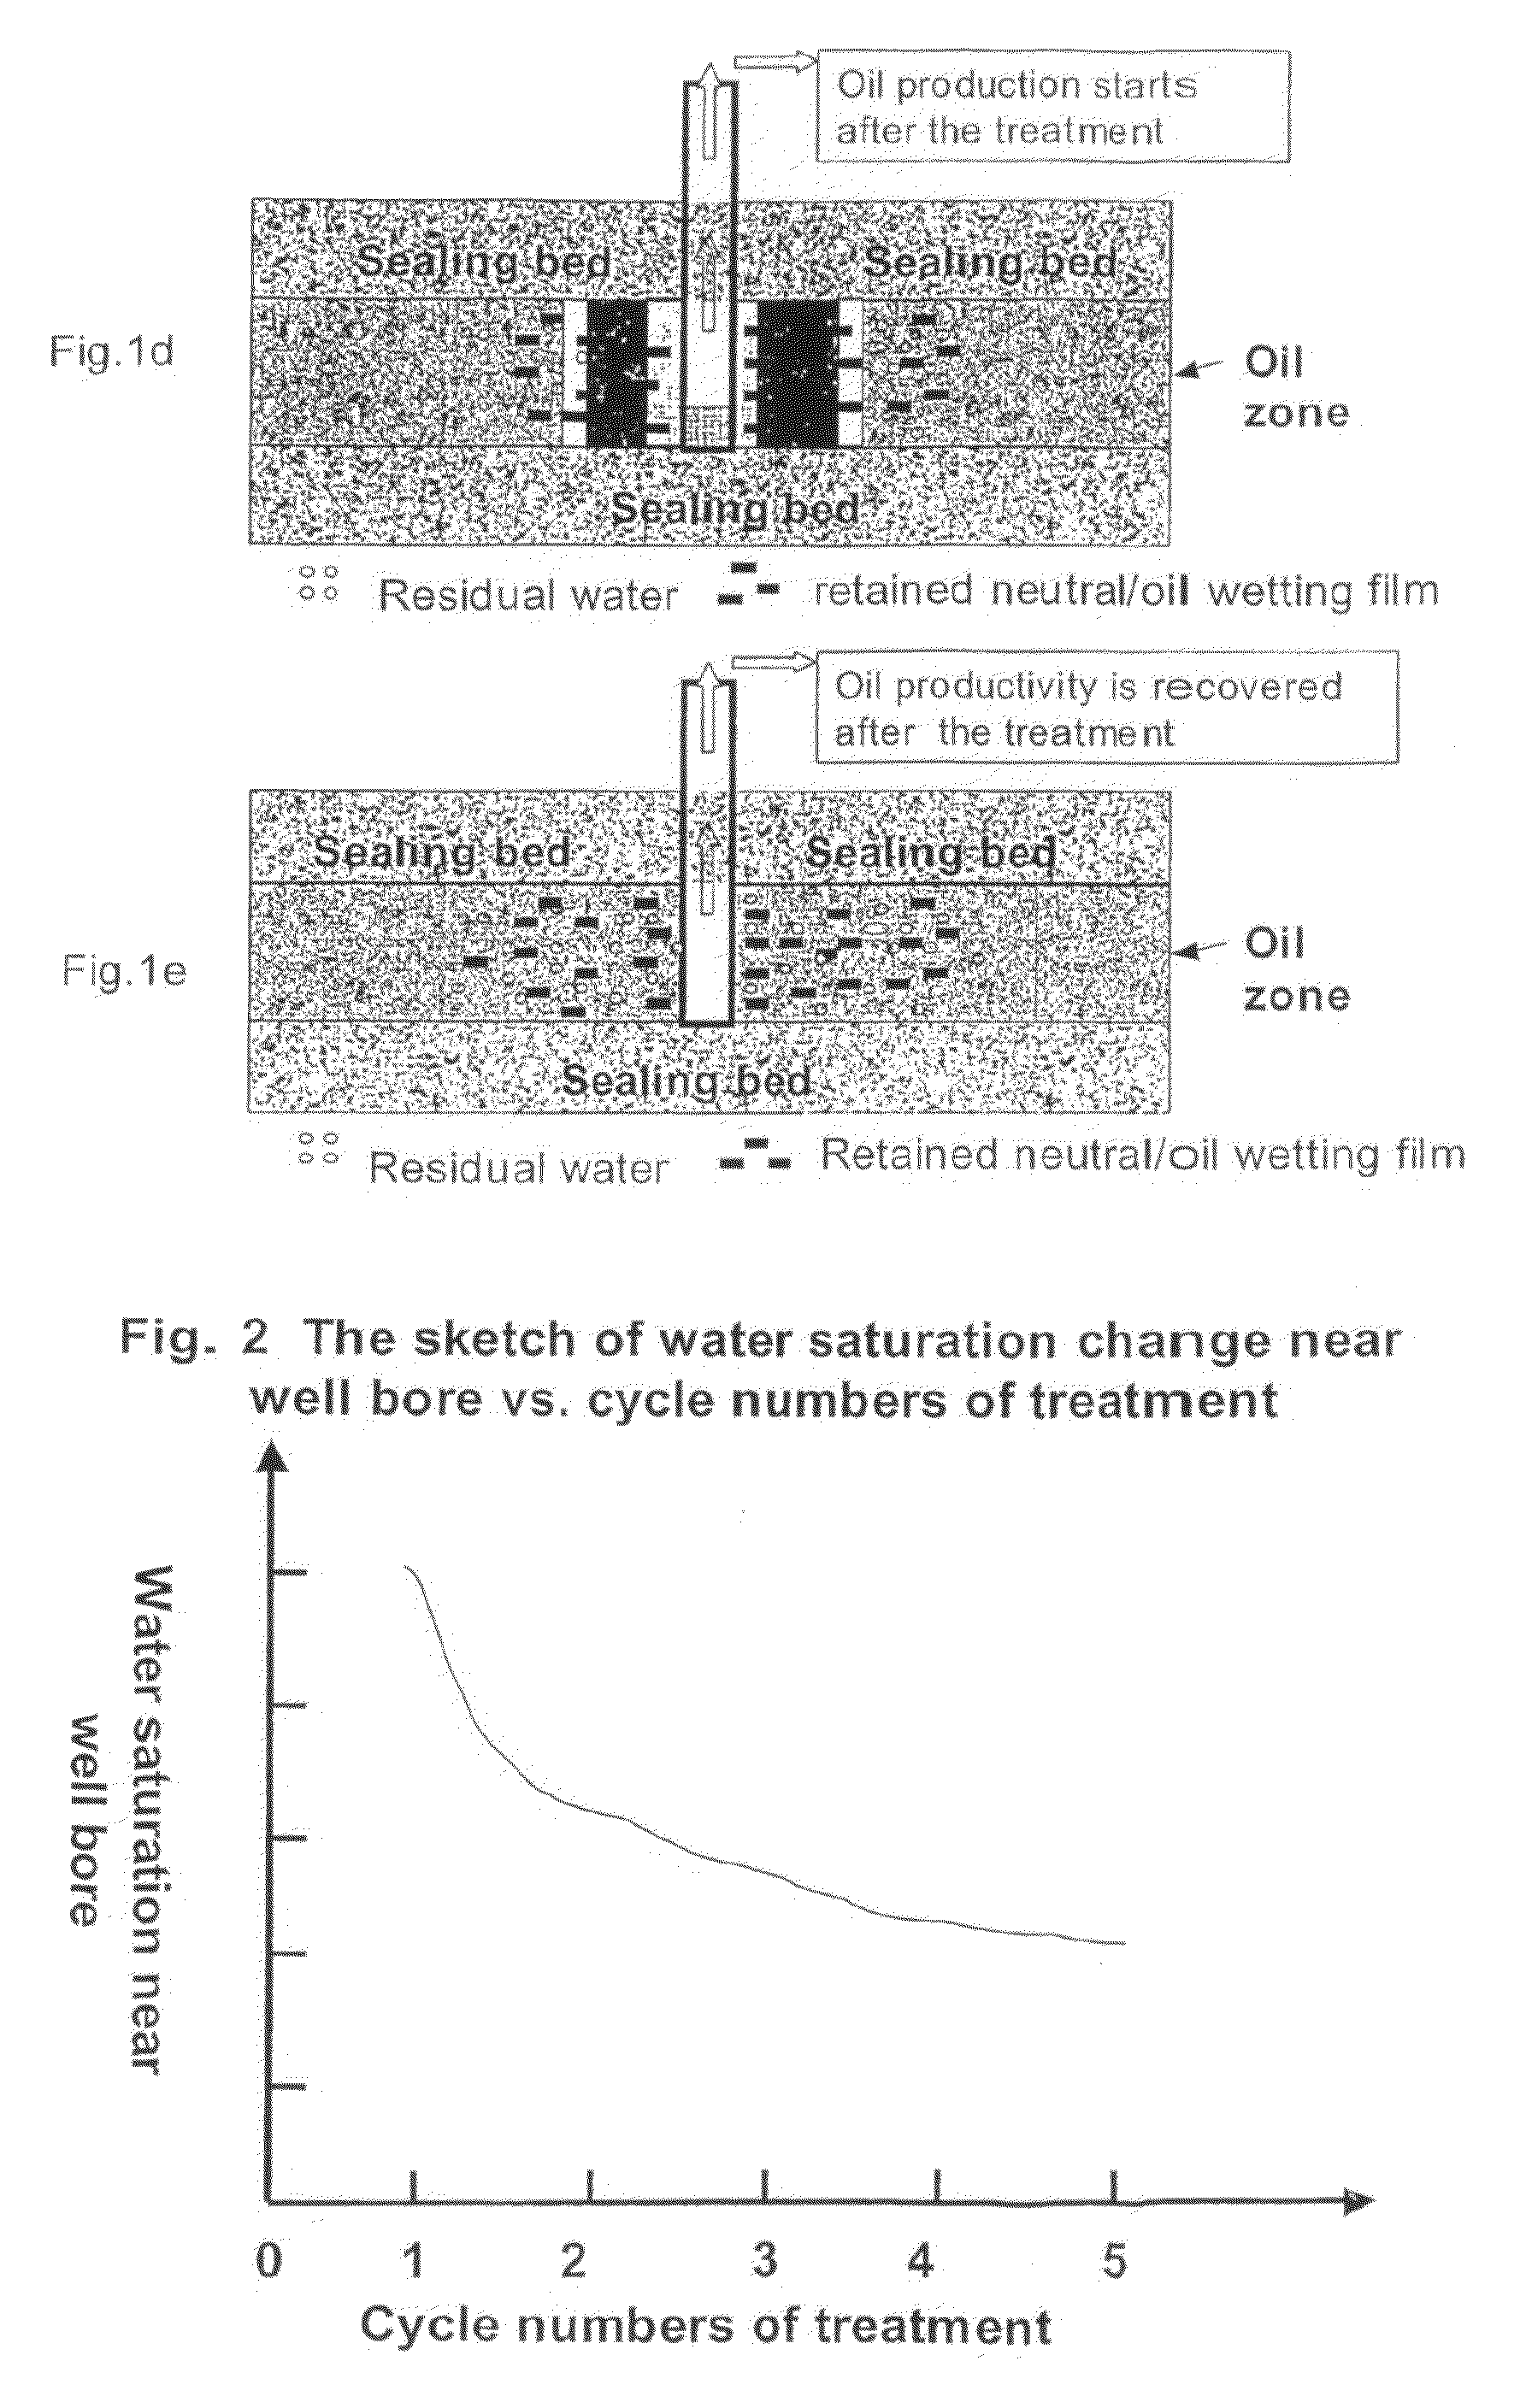 Method for increasing the production of hydrocarbon liquids and gases